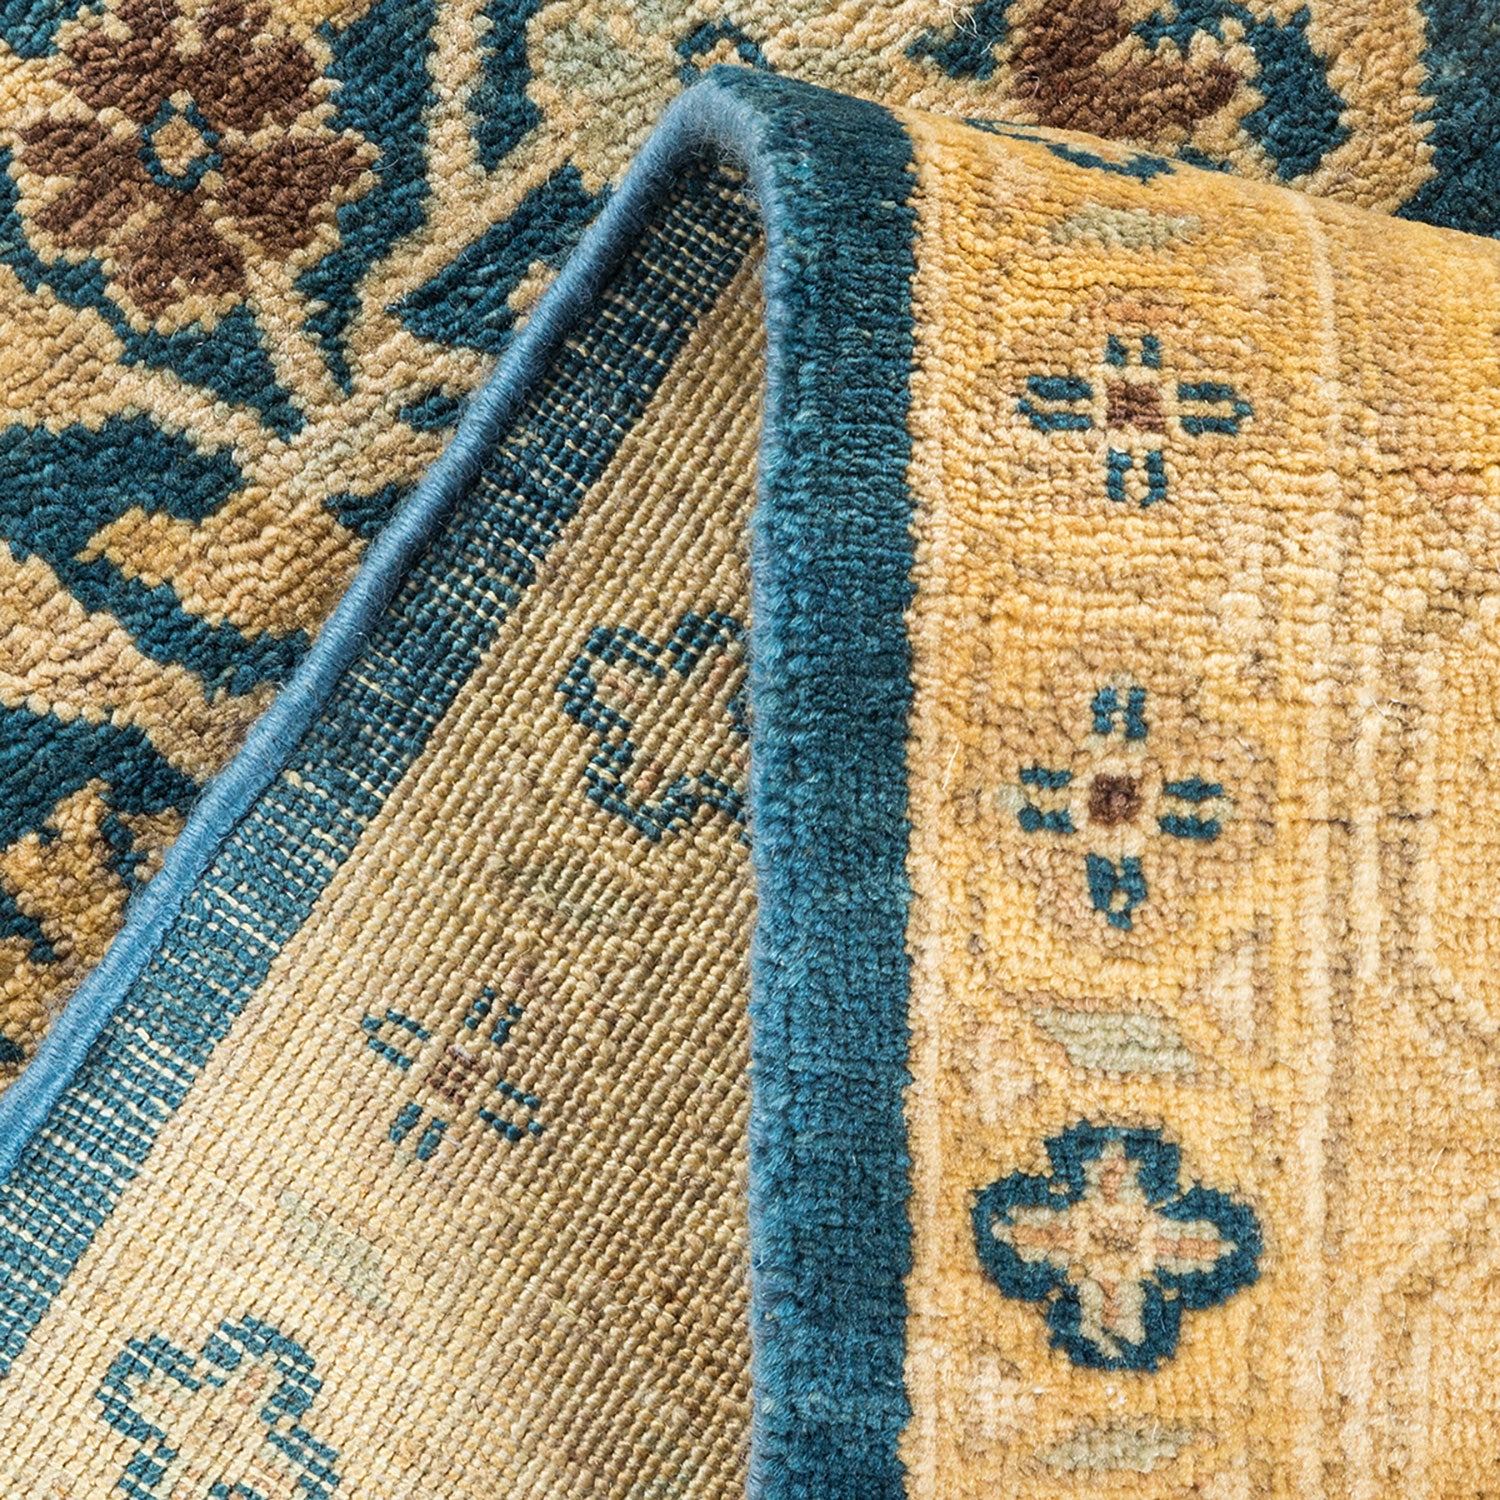 Close-up of a folded, patterned textile rug showcasing intricate design